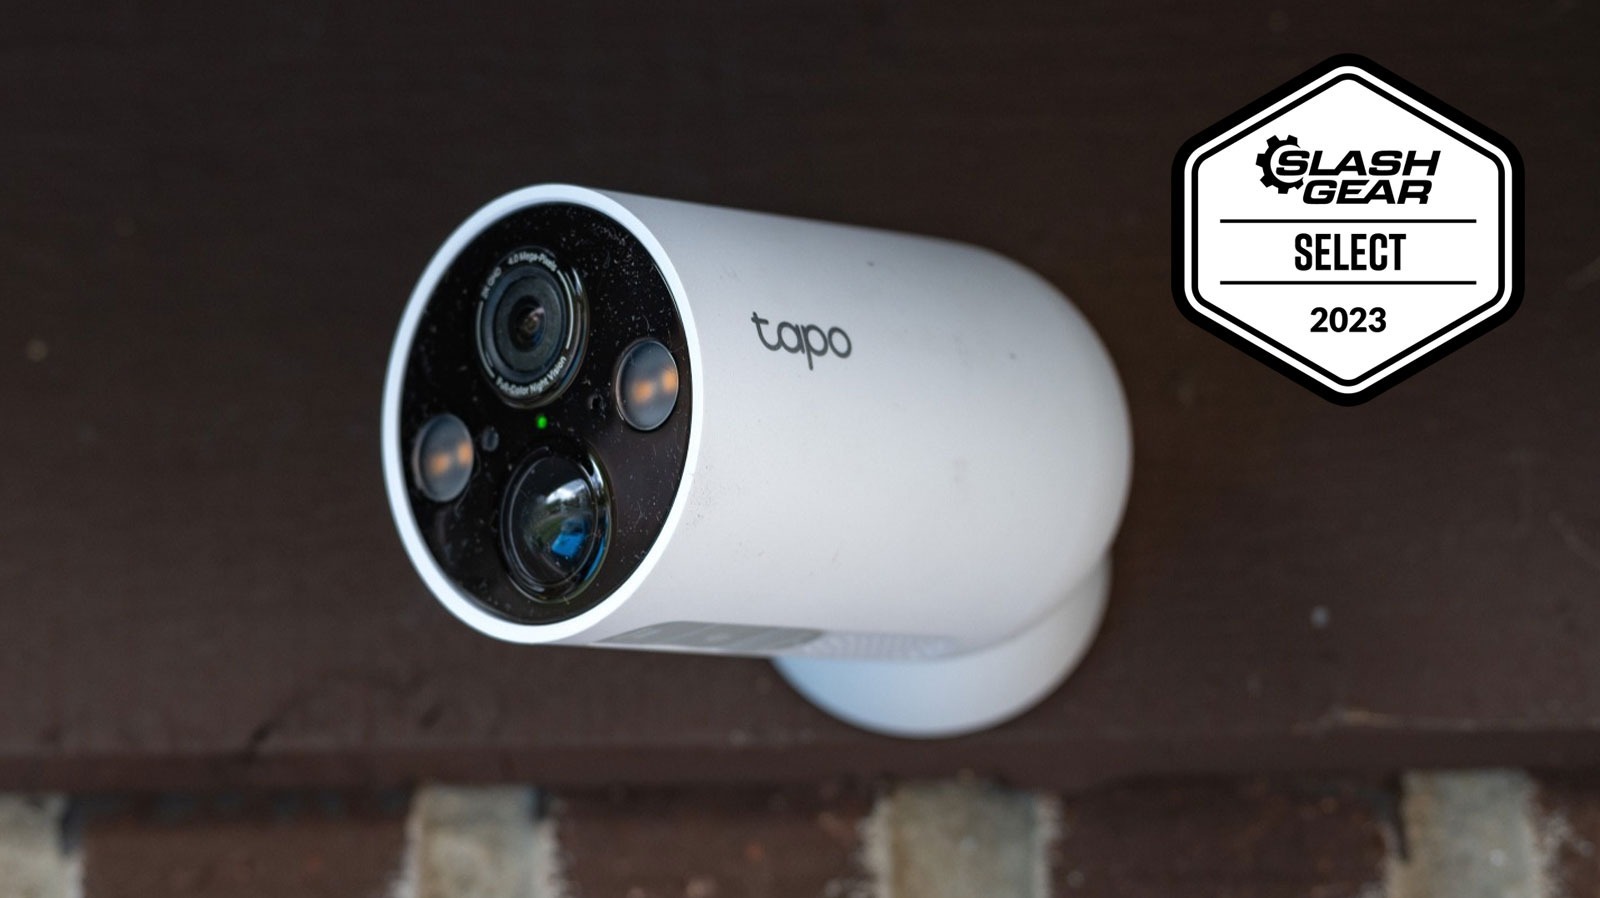 Tapo C425, Smart Wire-Free Security Camera